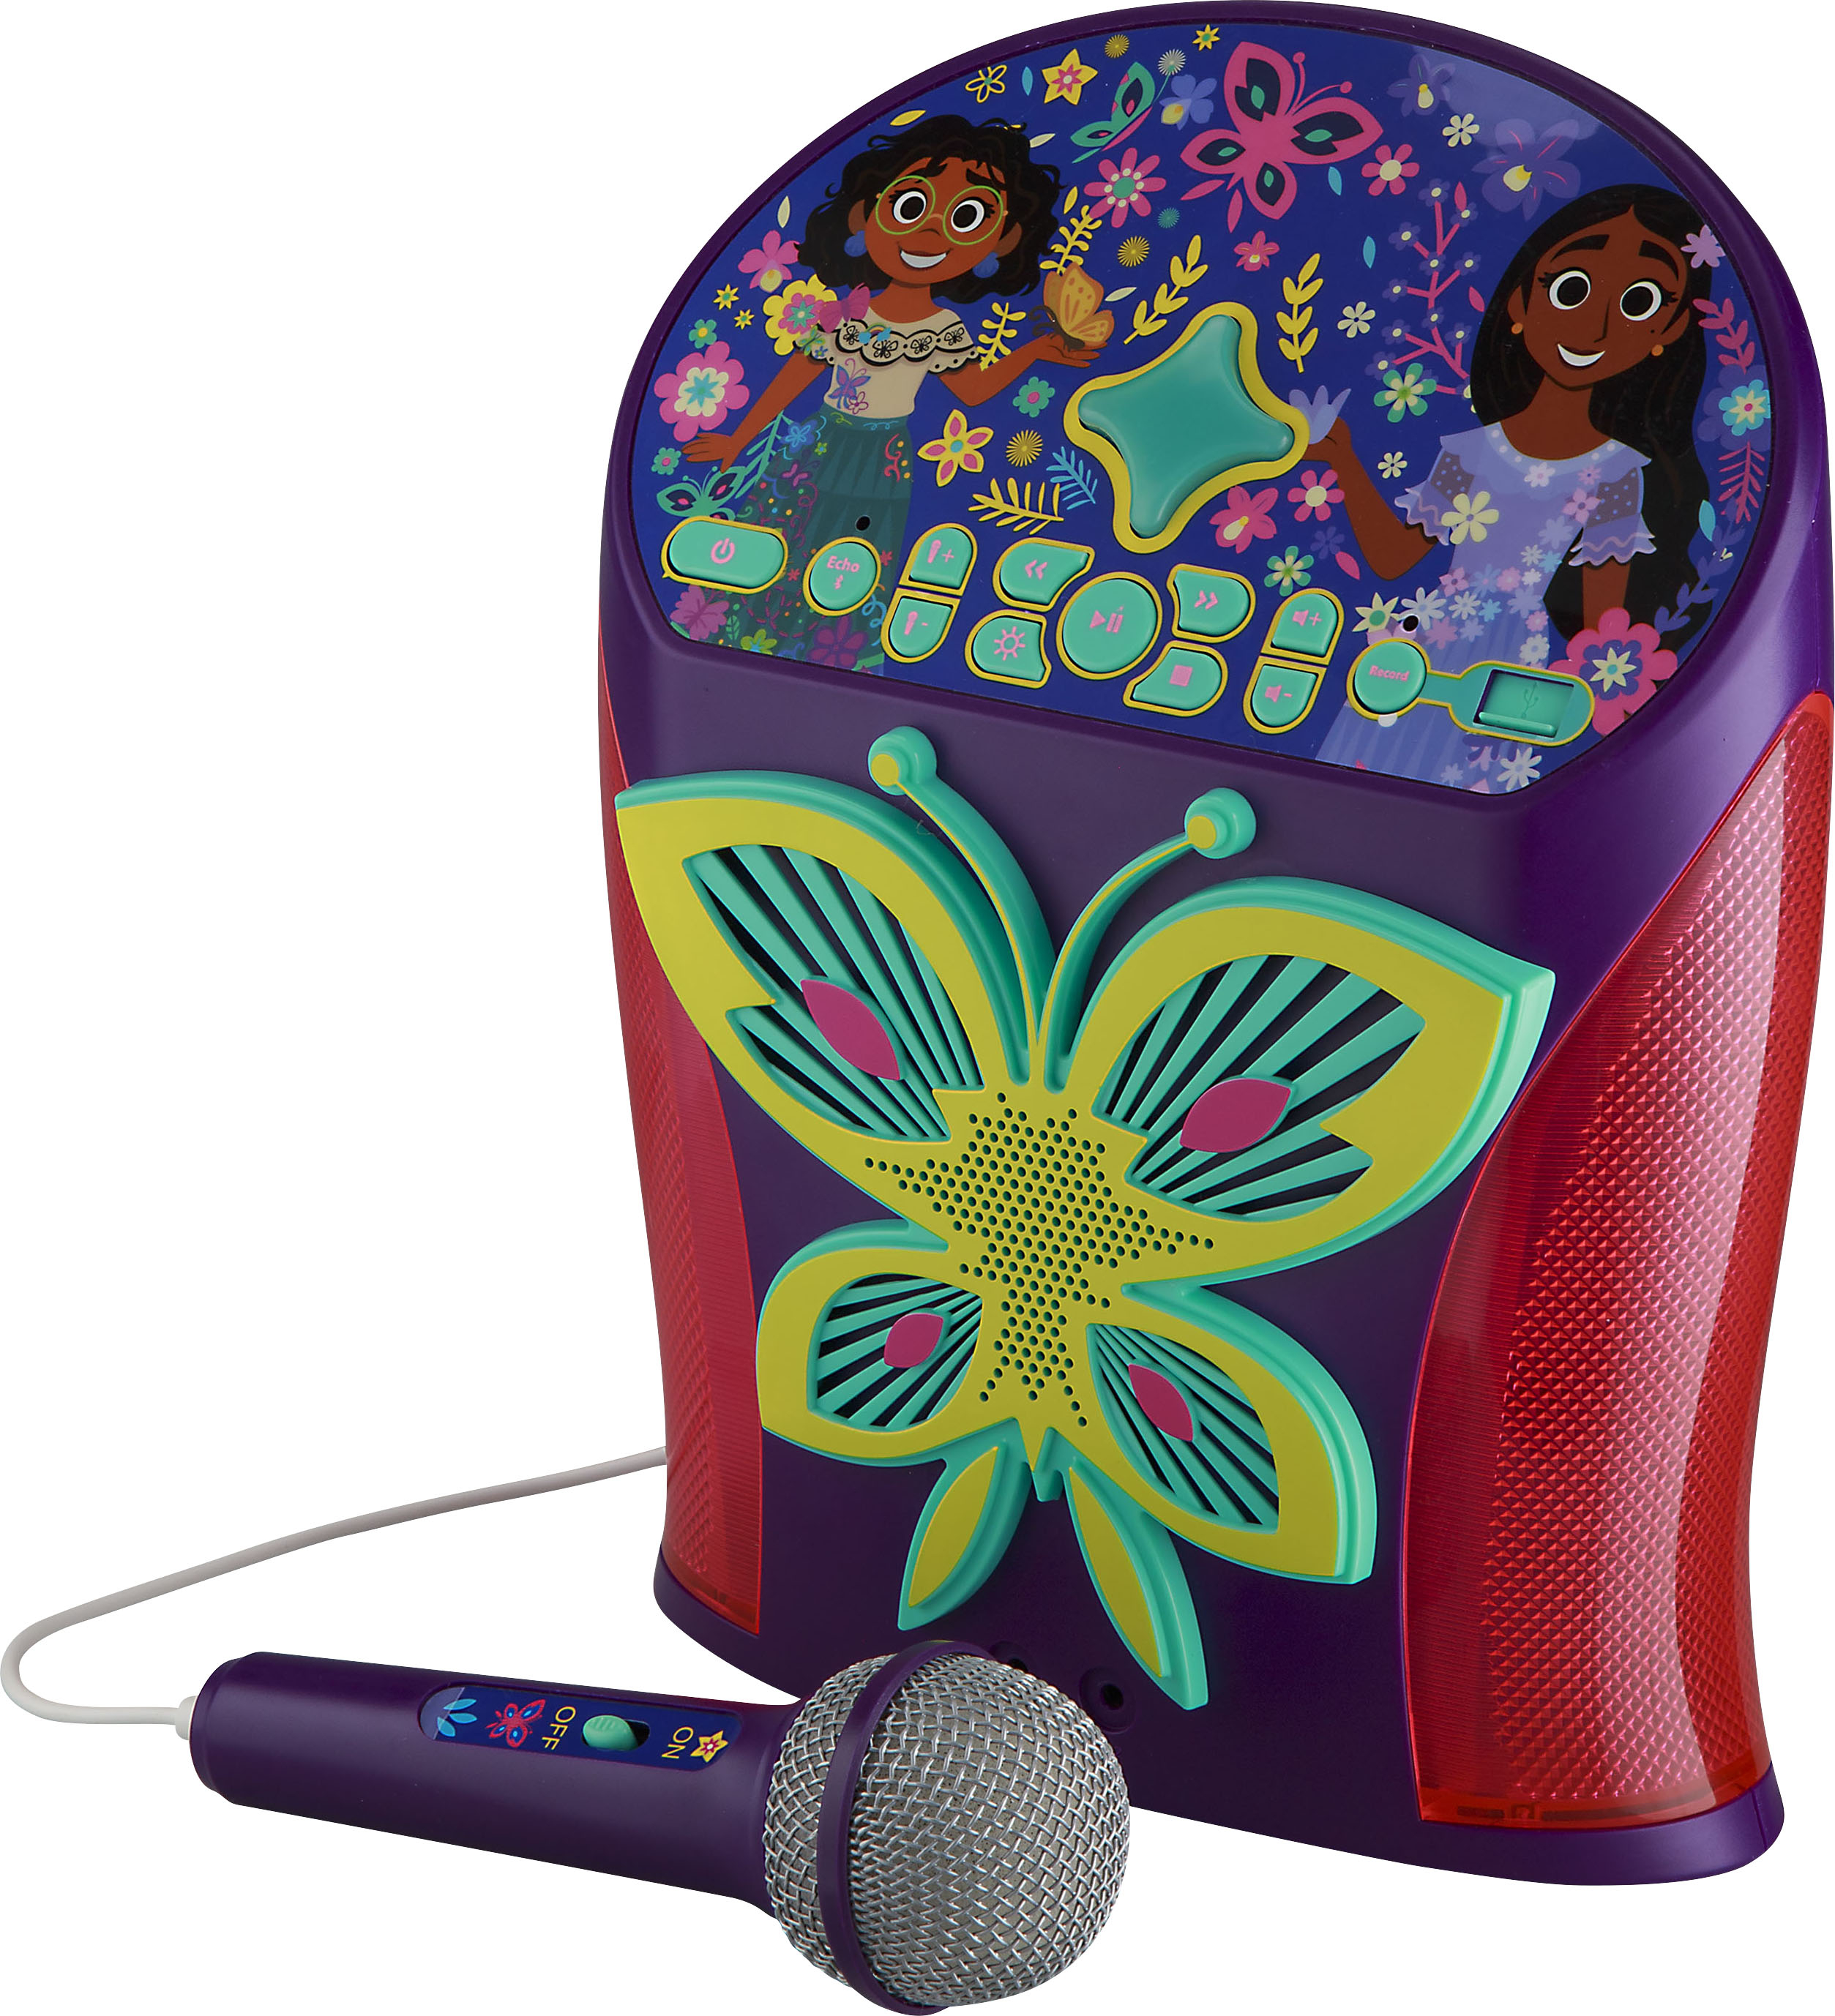 eKids Disney Encanto Karaoke Machine Bluetooth Speaker with Microphone for Kids Speaker with USB Port to Play Music Easily Access Disney Playlists with New EZ Link Feature 